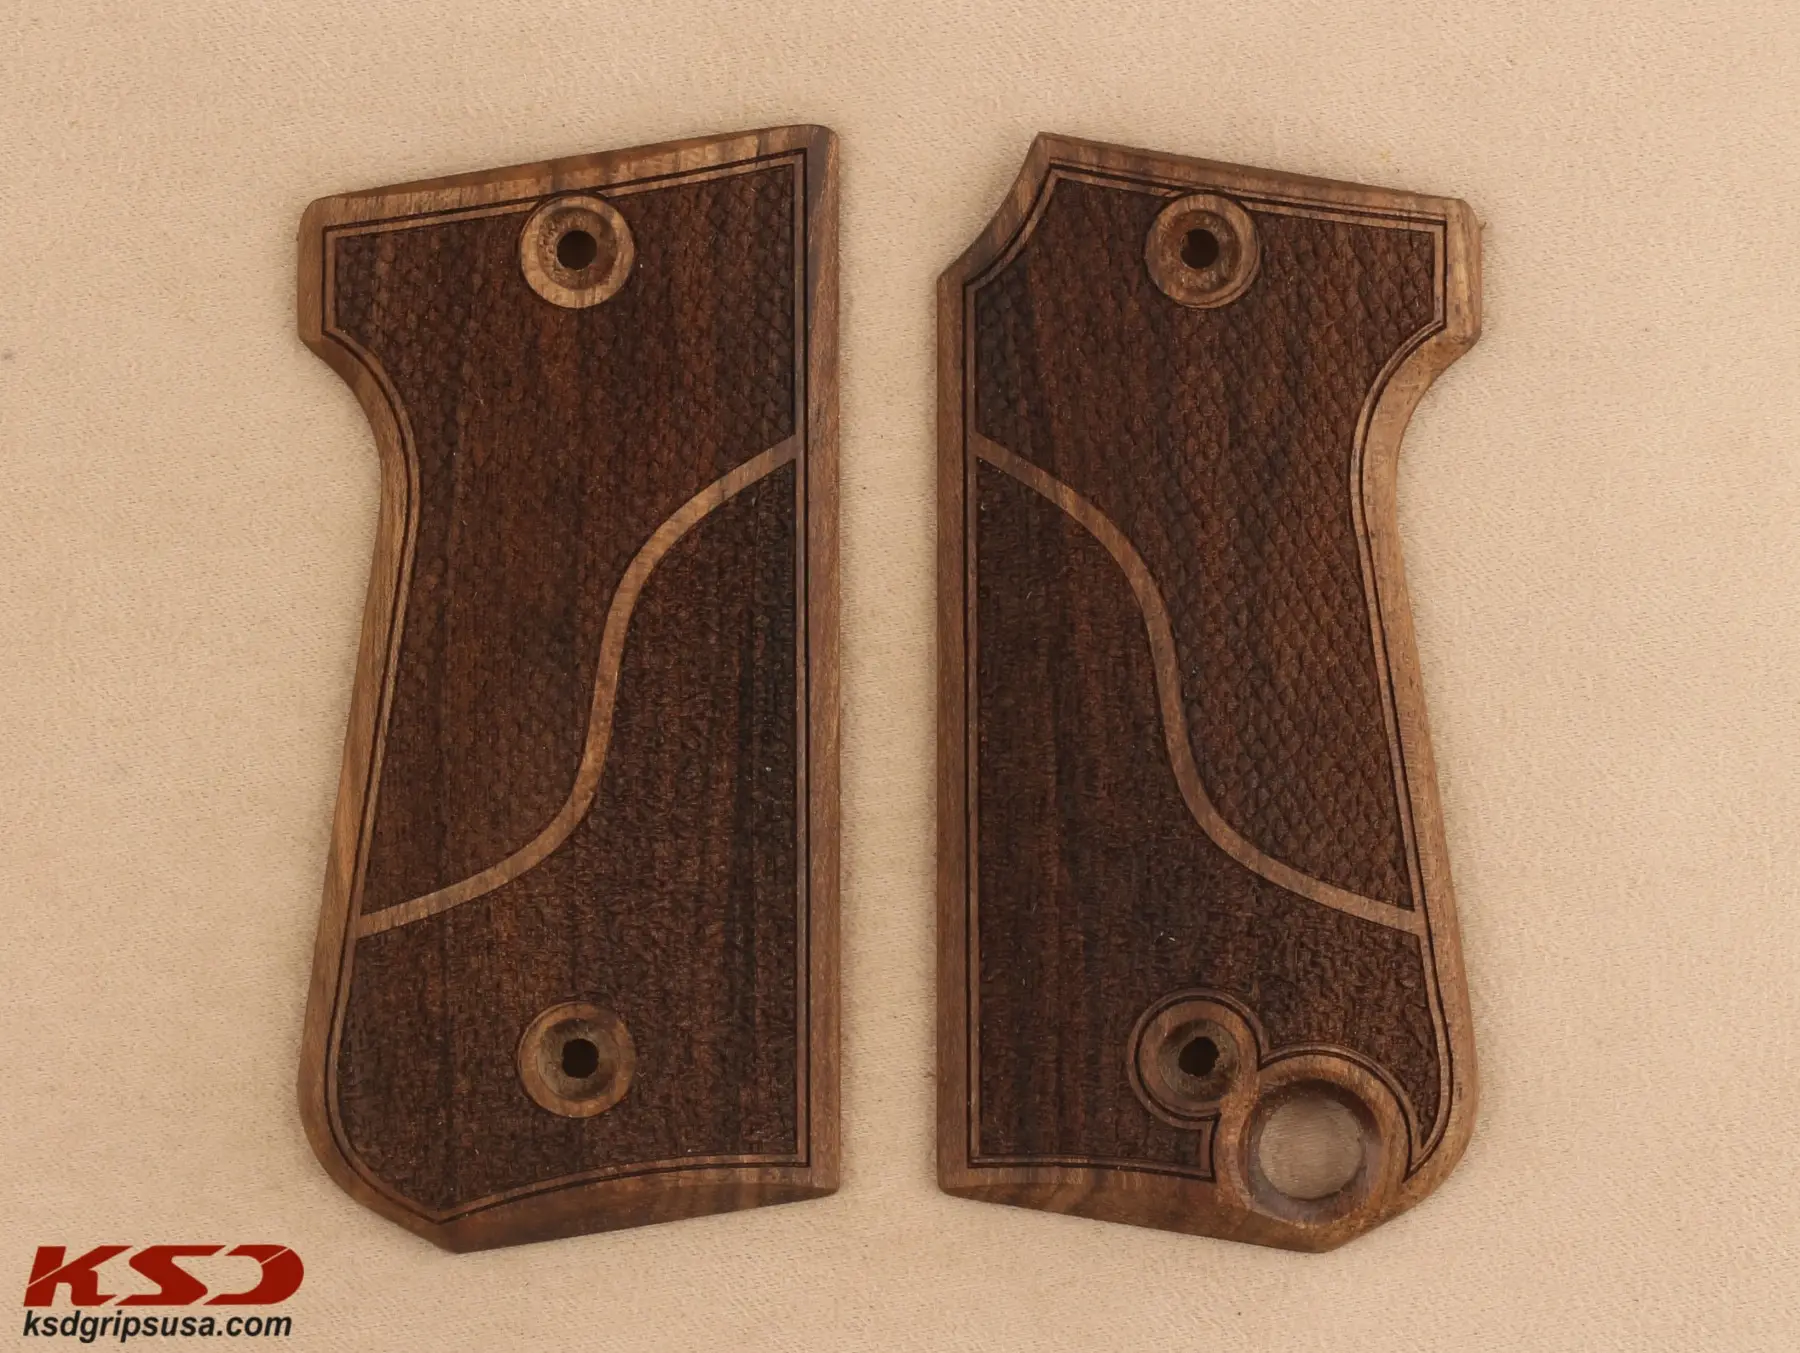 

KSDGrips Brand for Unique RR 51 Compatible Walnut Grip for Replacement with Half Pattern